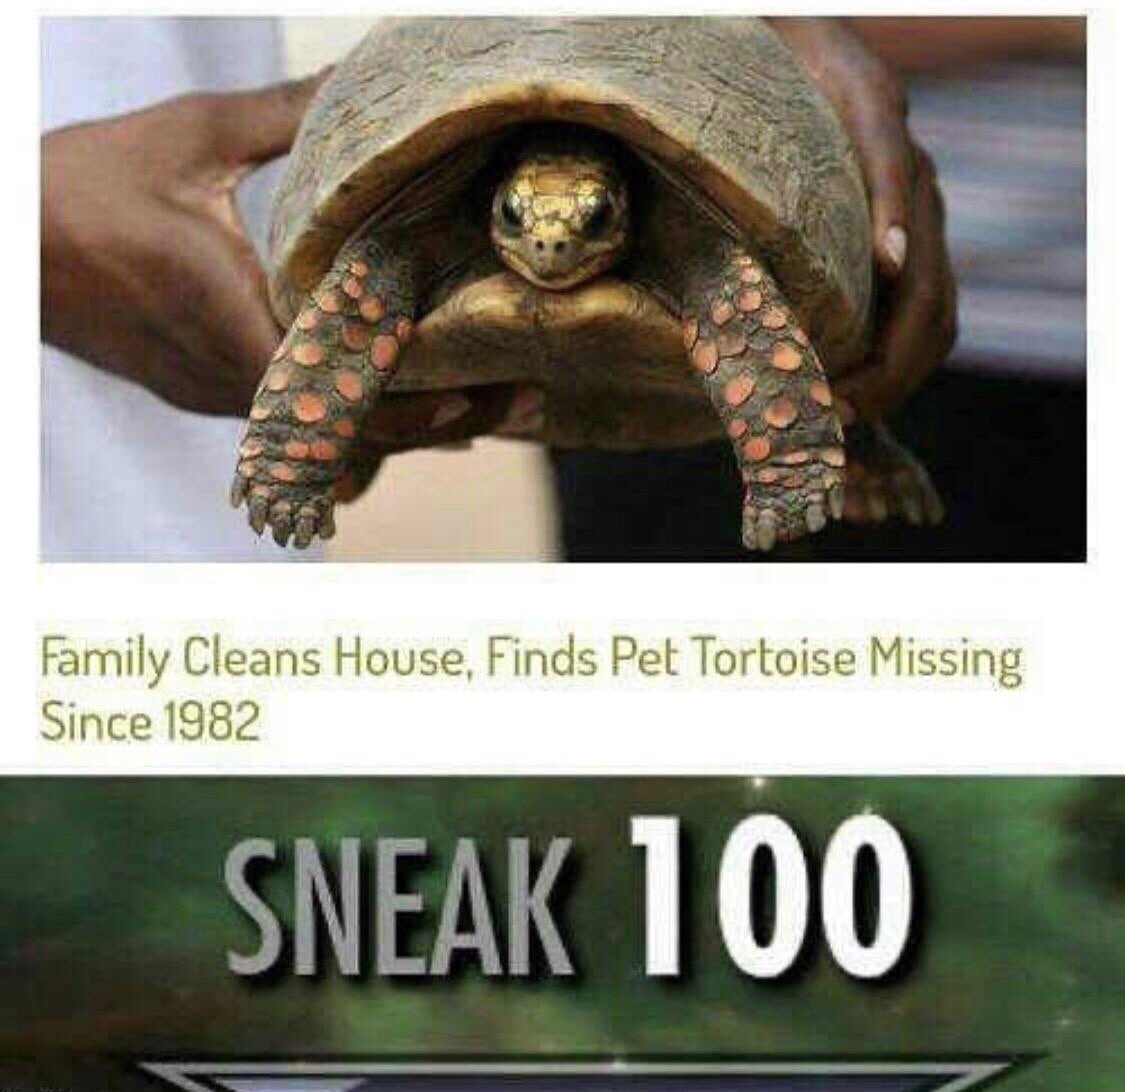 dank memes - funny memes - family cleans house finds pet tortoise missing since 1982 - Family Cleans House, Finds Pet Tortoise Missing Since 1982 Sneak 100